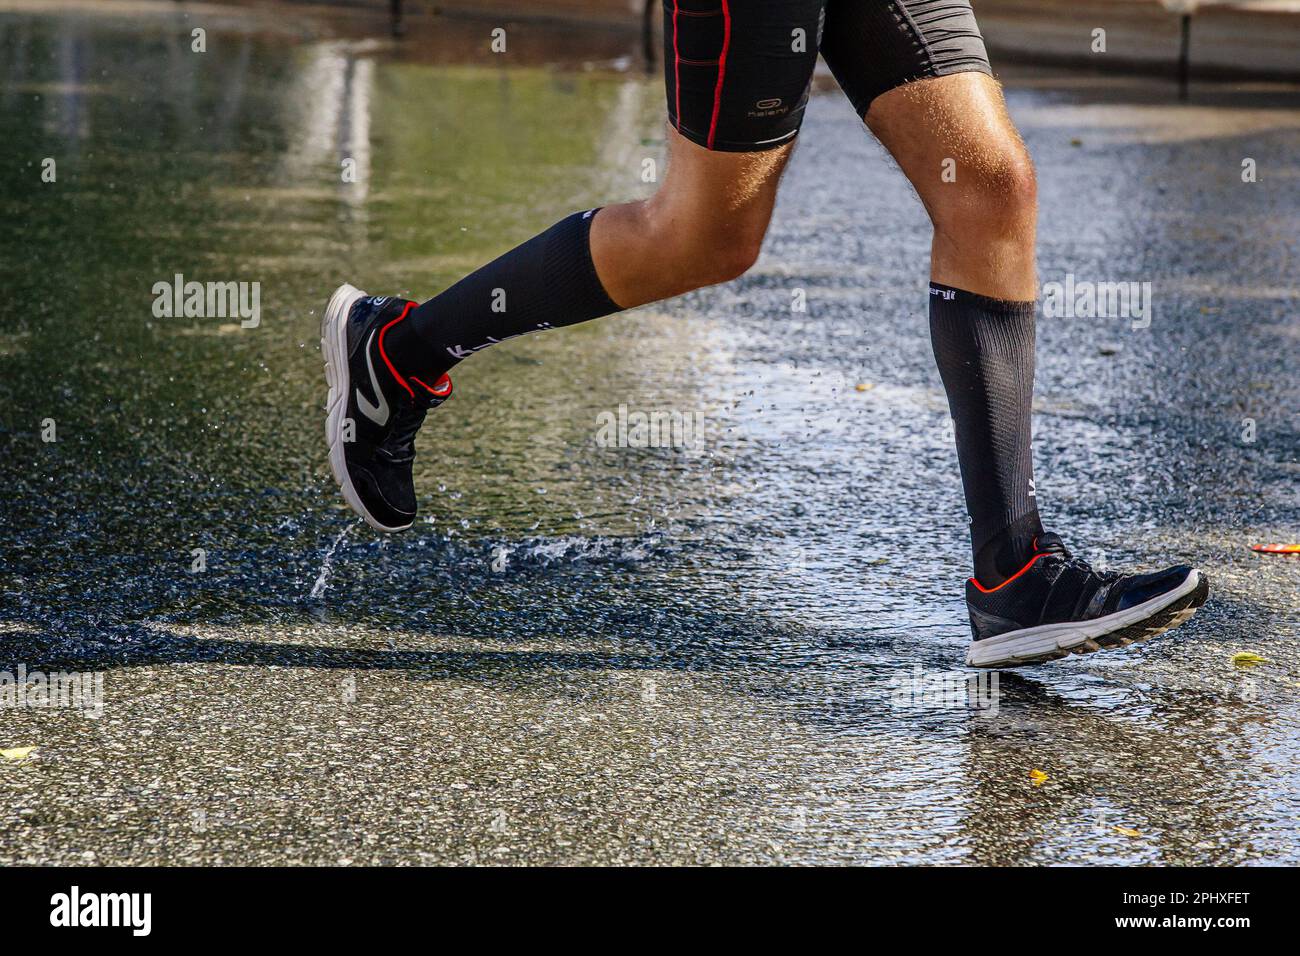 https://c8.alamy.com/comp/2PHXFET/male-runner-irunning-on-water-road-in-city-marathon-race-shoes-compression-socks-and-tights-french-running-brand-kalenji-2PHXFET.jpg